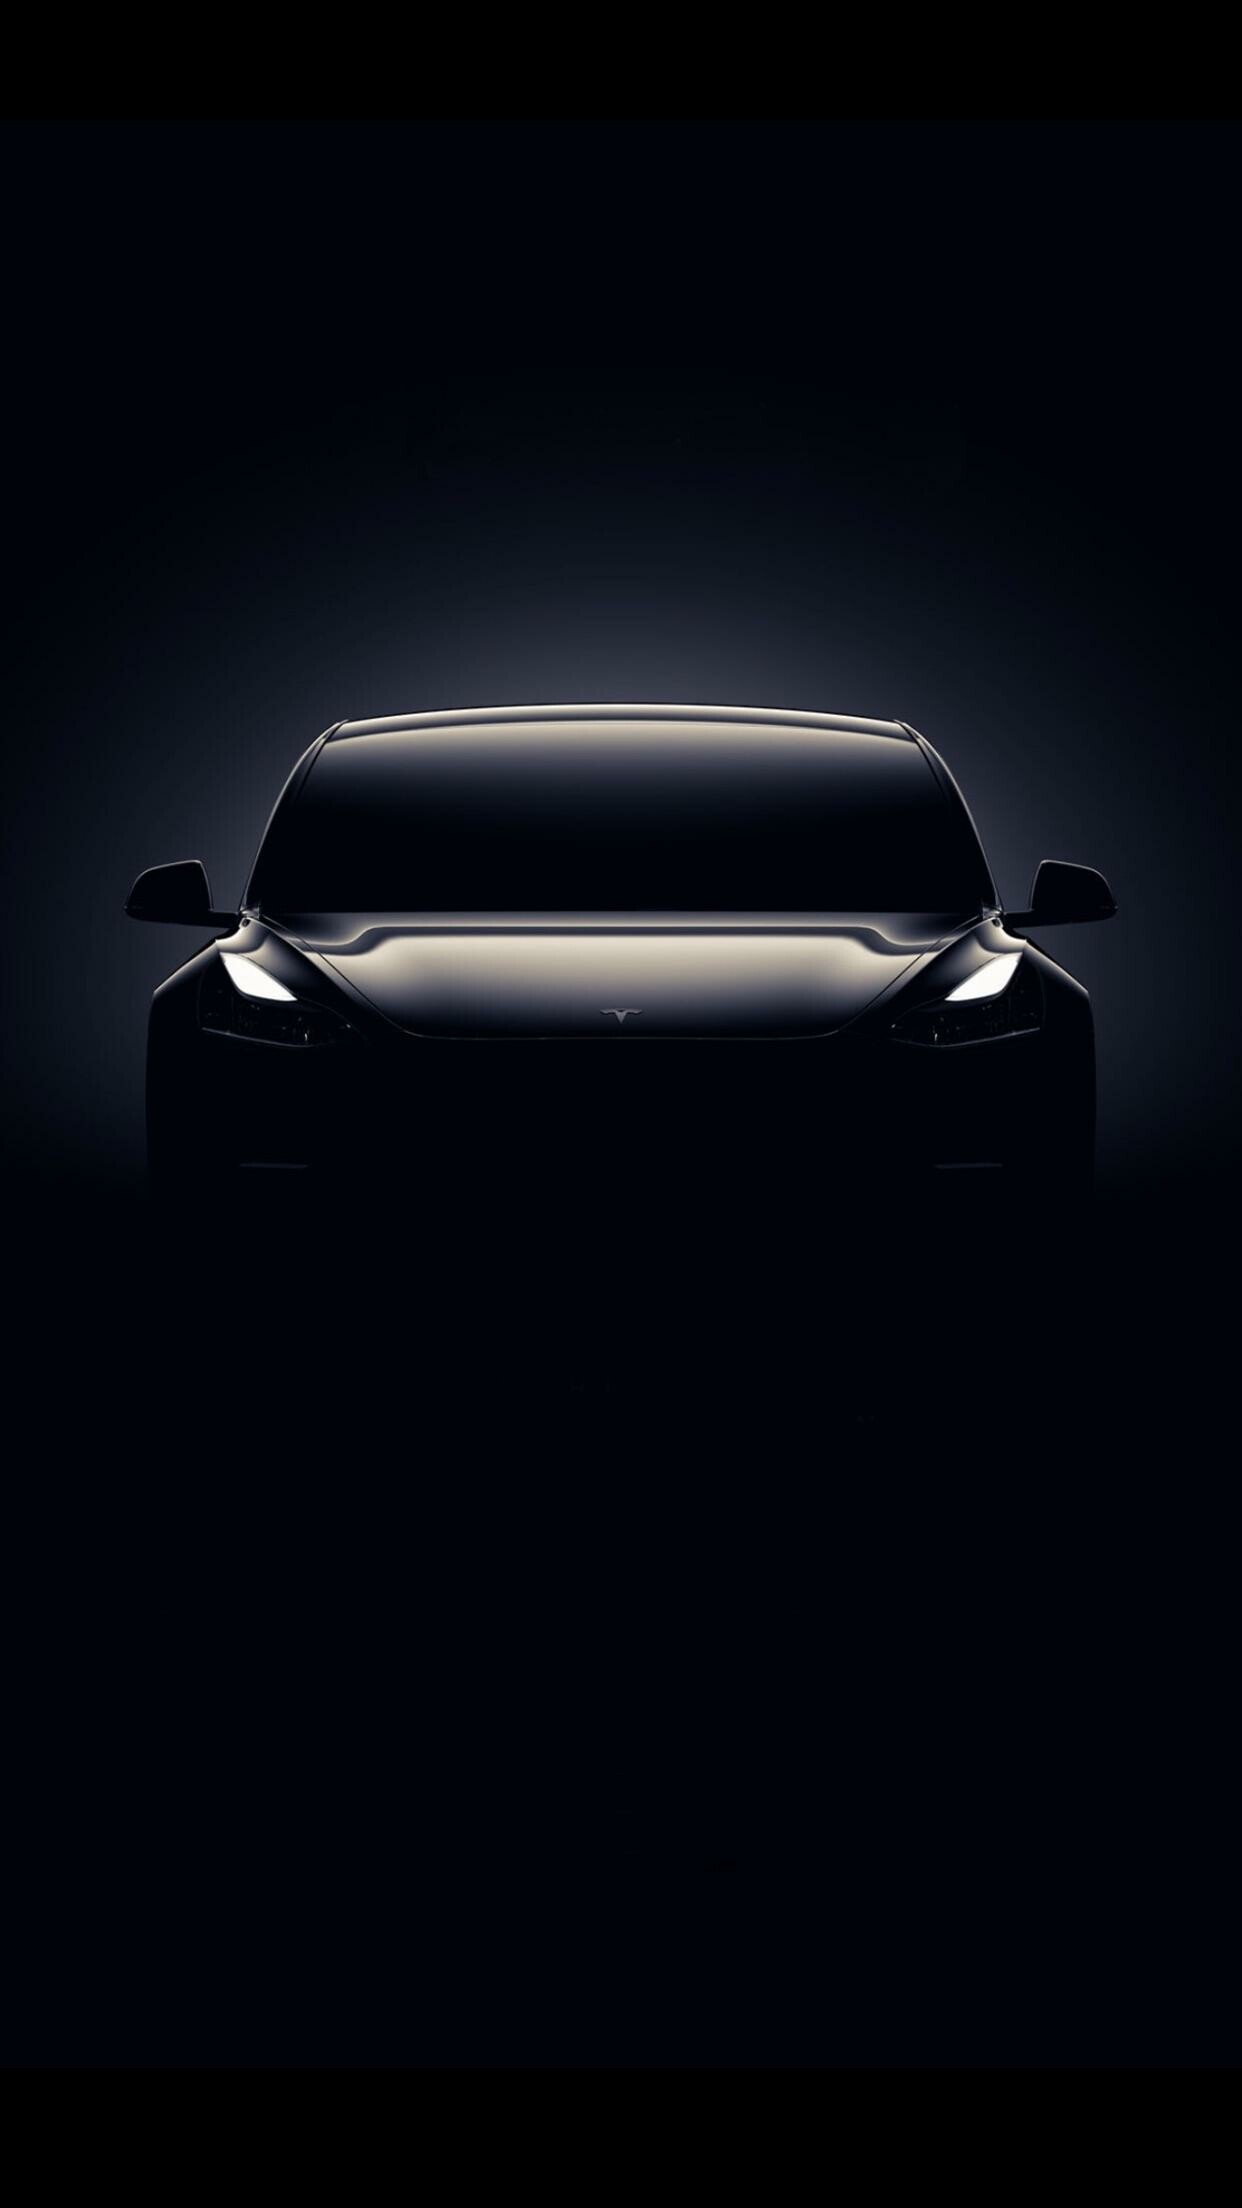 Tesla Model S: A transnational American automotive and clean energy corporation, EV, Travels 300 miles per charge. 1250x2210 HD Background.